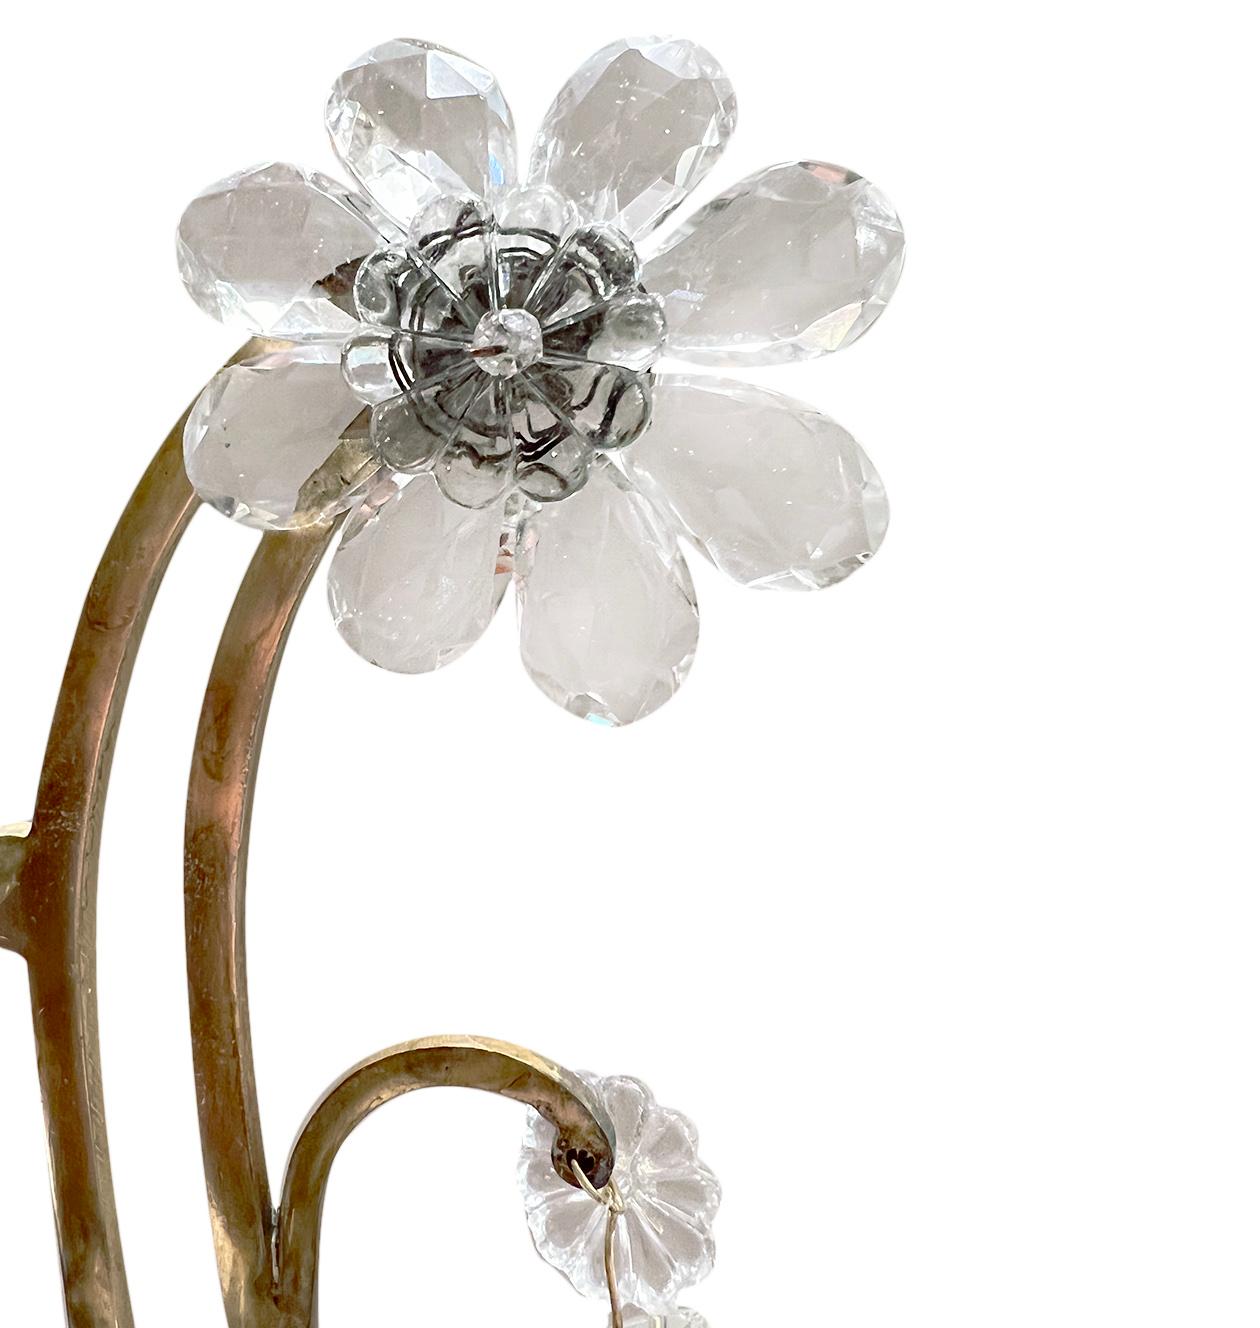 Pair of circa 1920's French bronze doré candelabras with 4 lights and crystal flowers.

Measurements:
Height: 22.5